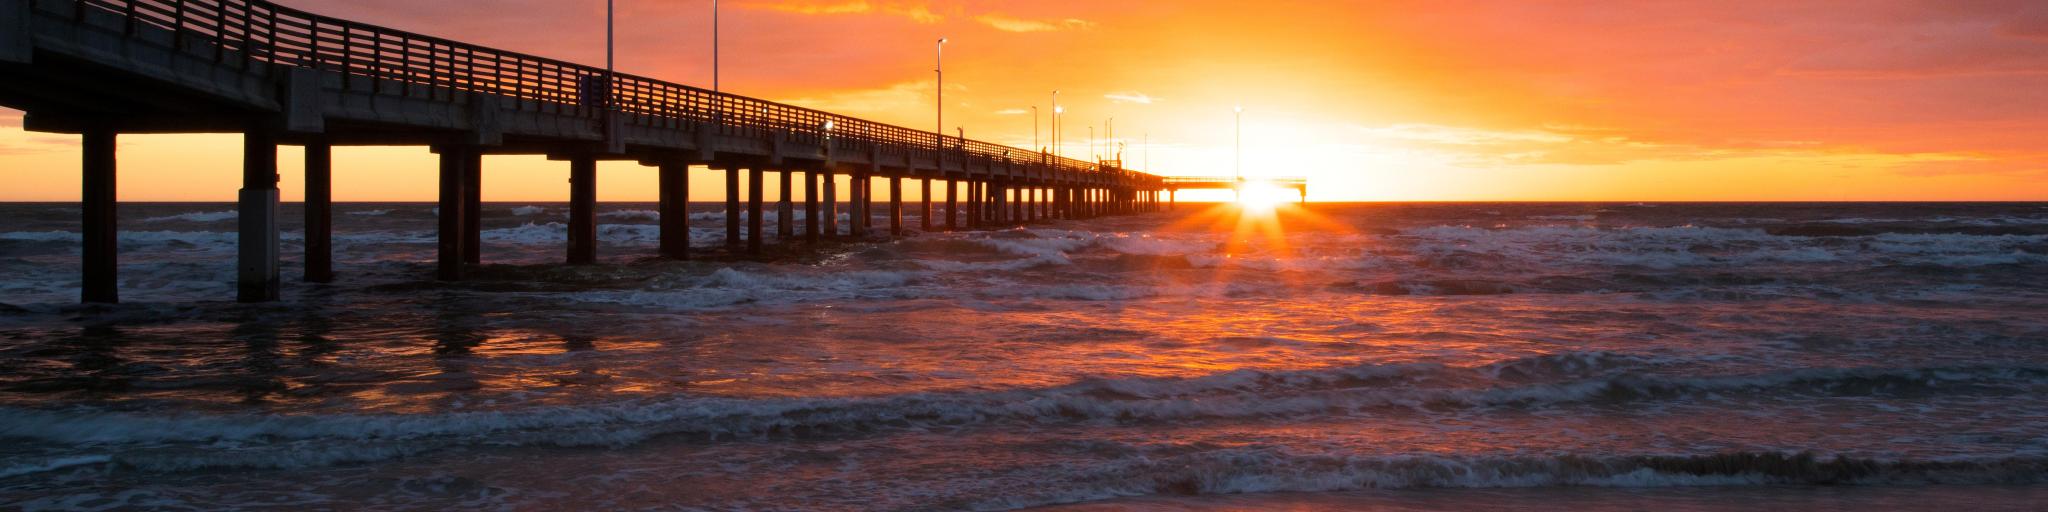 Corpus Christi, Texas, USA with the Bob Hall Pier on Padre Island at sunset with the sun low against the sea and beach in the foreground.